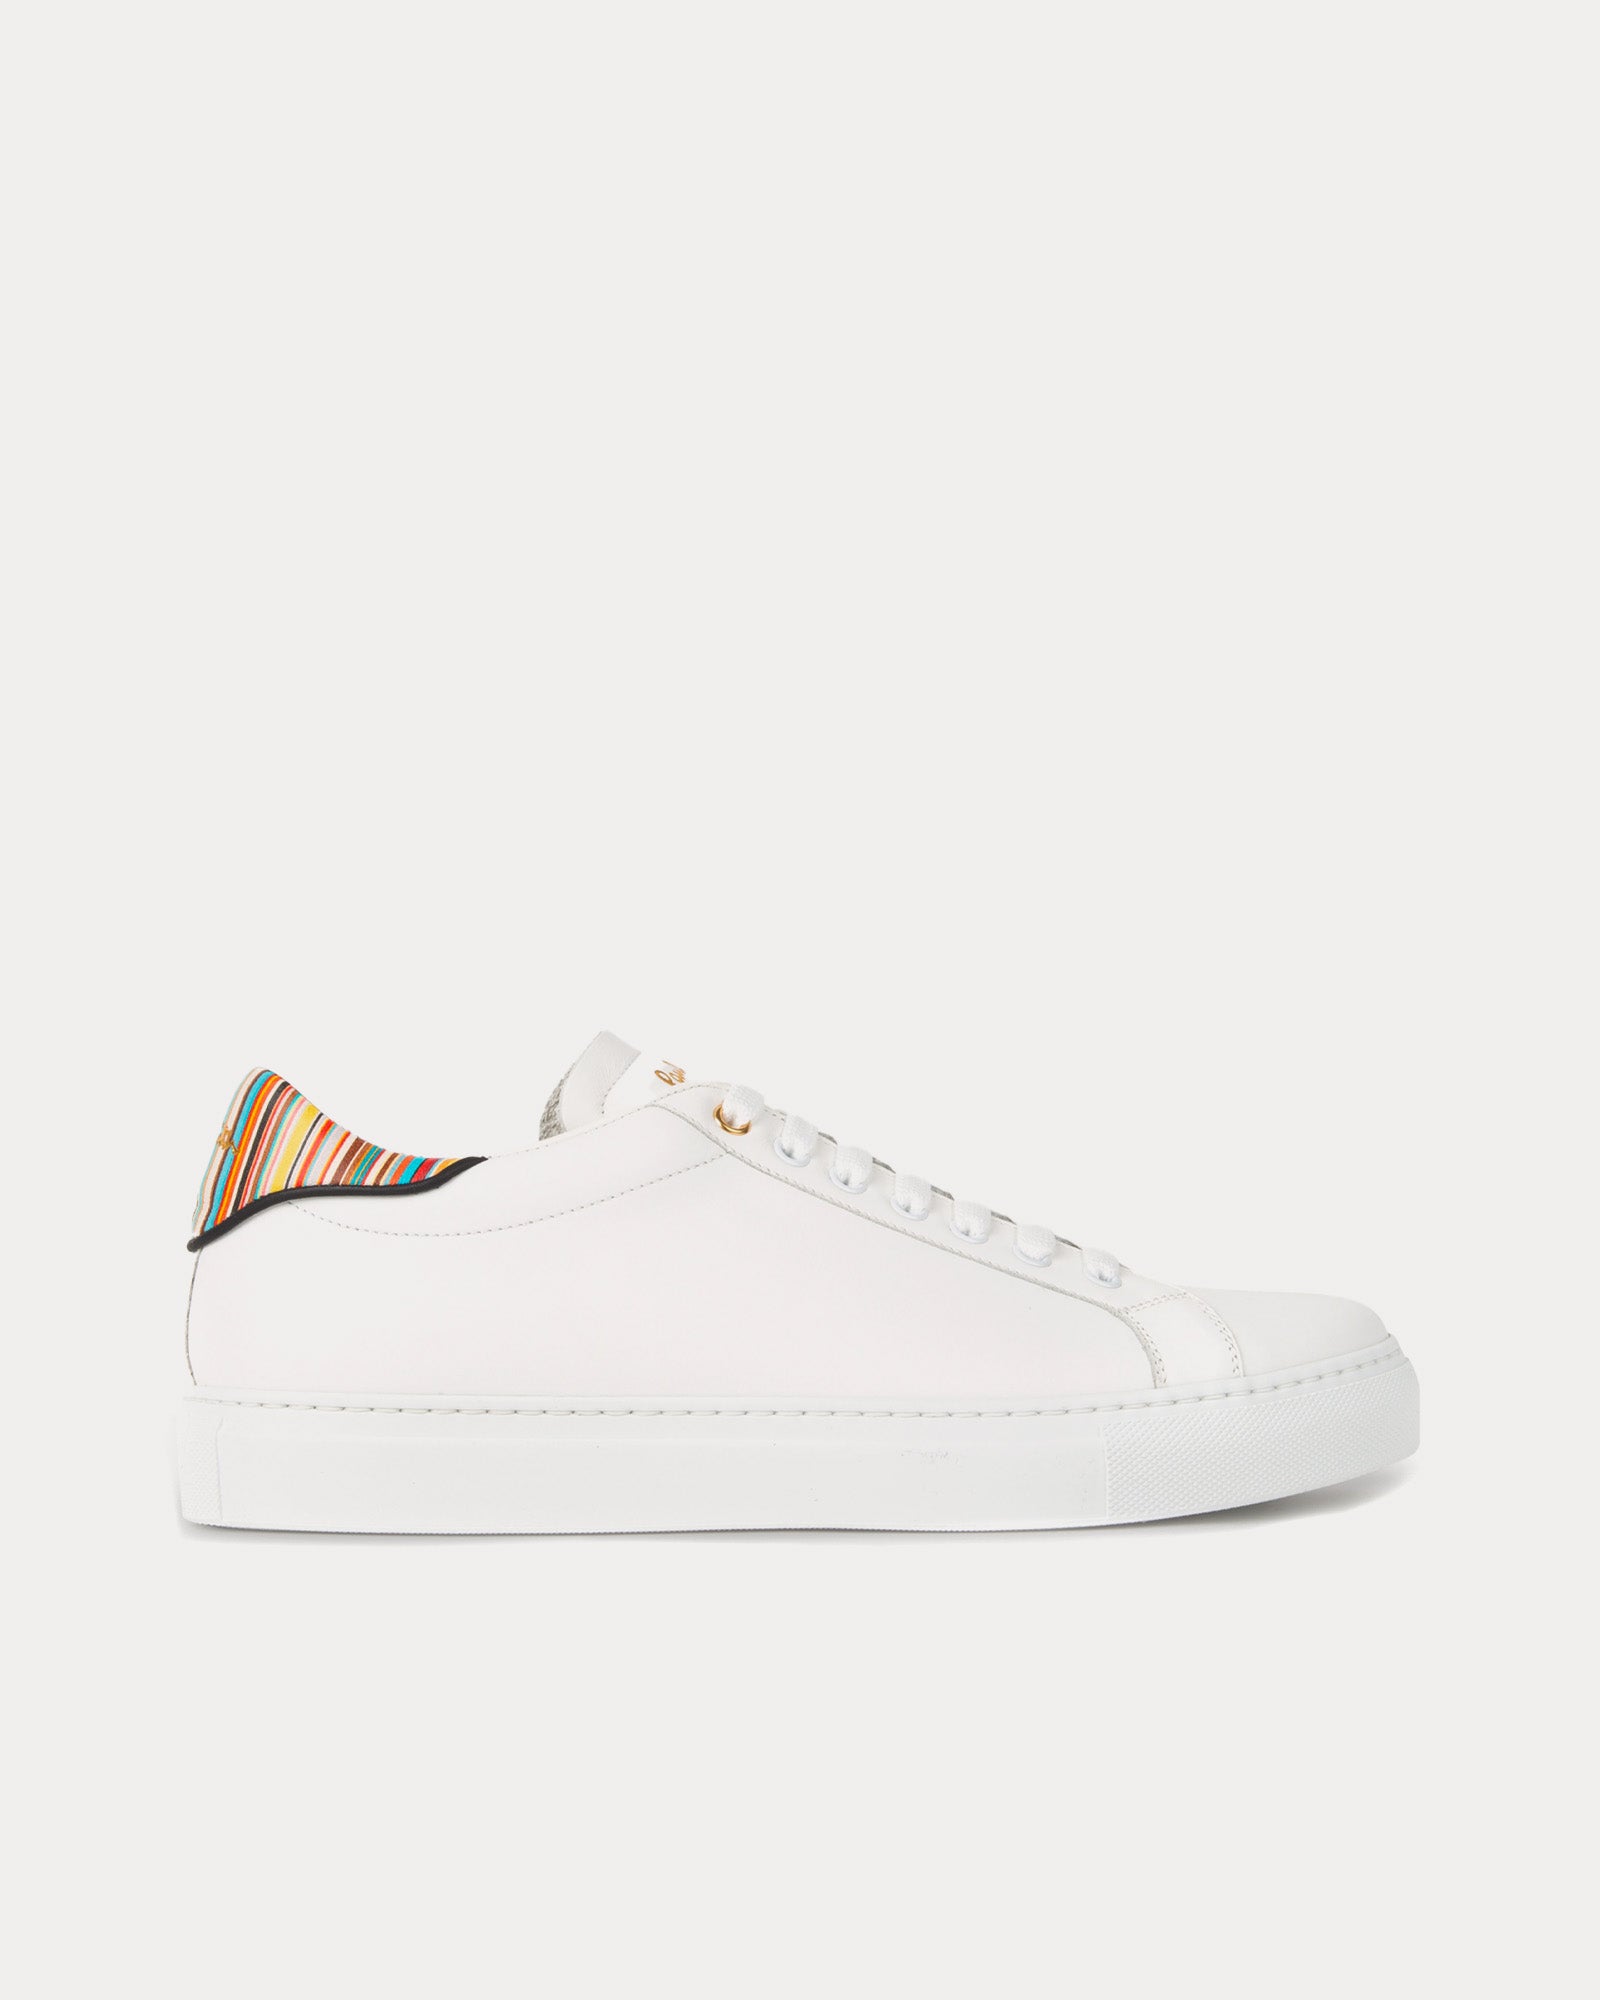 Paul Smith - Beck with Signature Stripe Leather White Low Top Sneakers